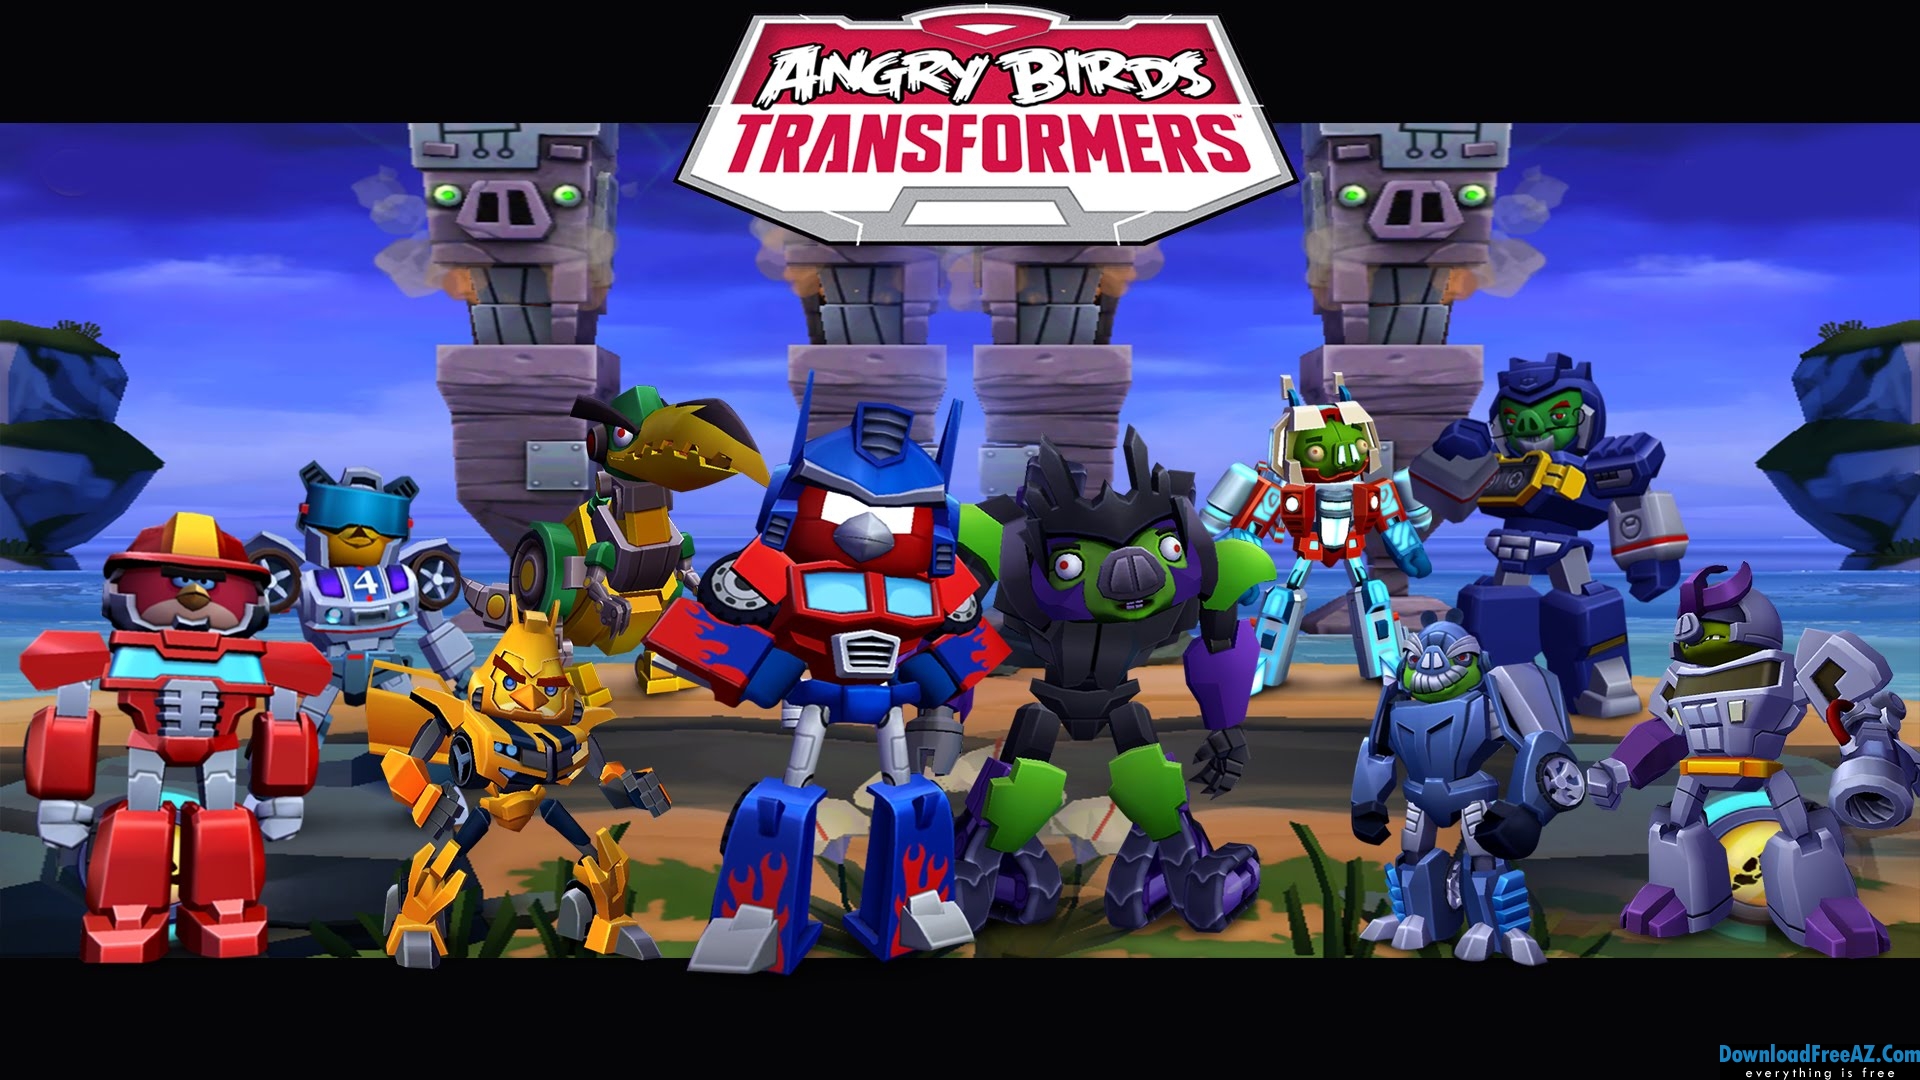 Download Angry Birds Transformers V1.27.2 APK (MOD, Crystal Unlocked) Android Free For Android